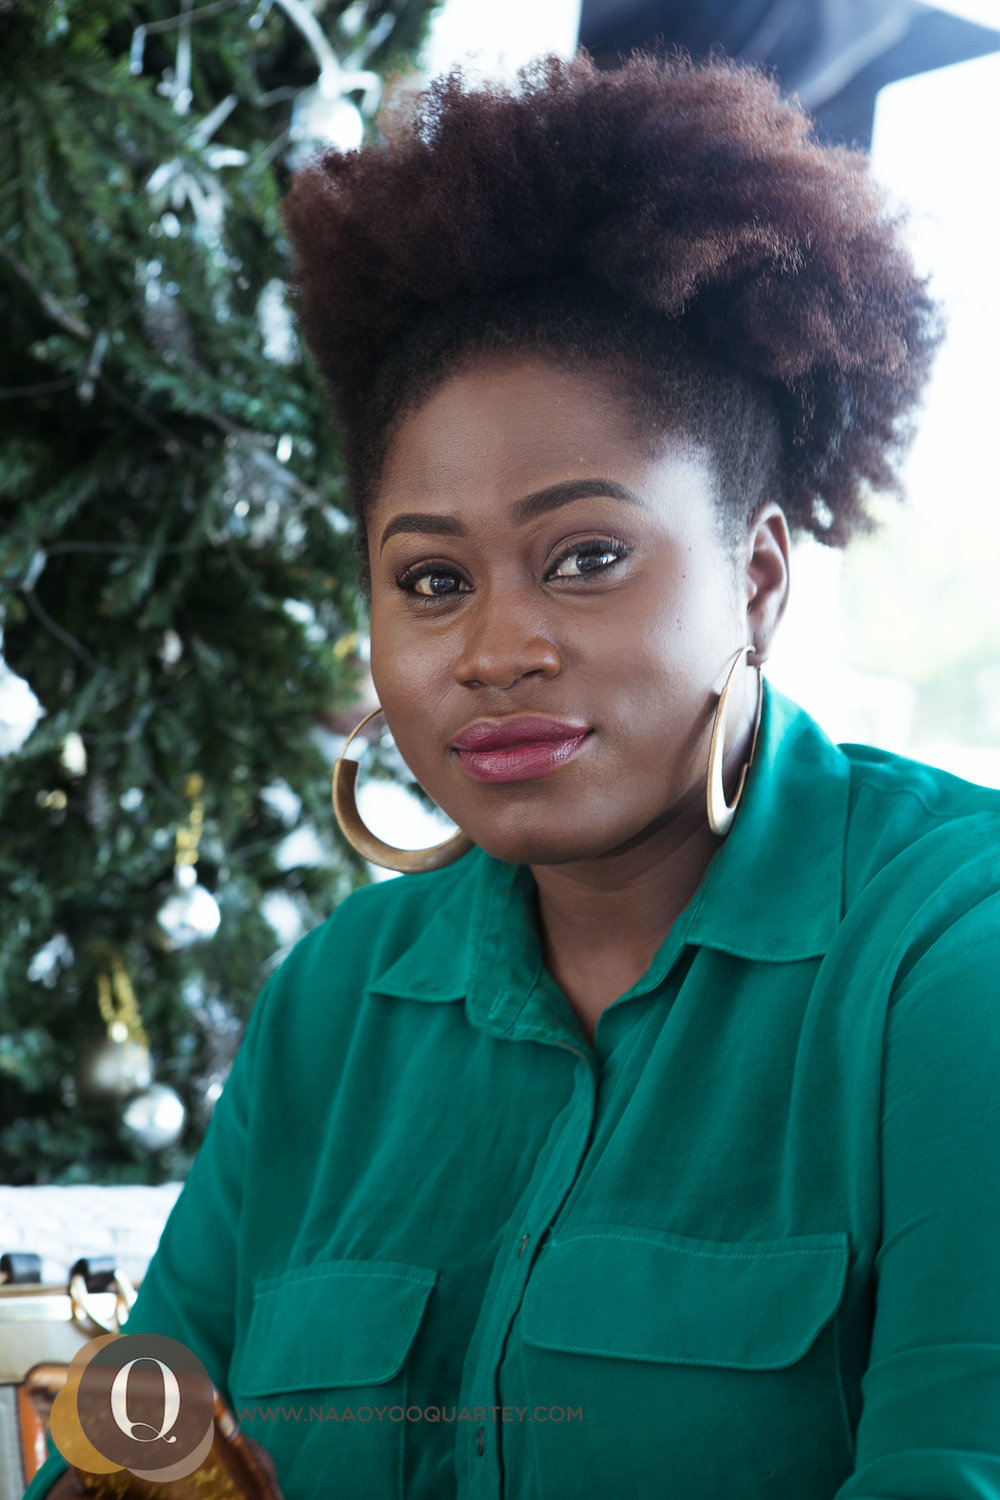 MyKpenkpeshie: Award-Winning Actress Lydia Forson Shares Her Natural Hair  Journey, Thoughts On Men Who Love Natural Hair & More... — Naa Oyoo Quartey